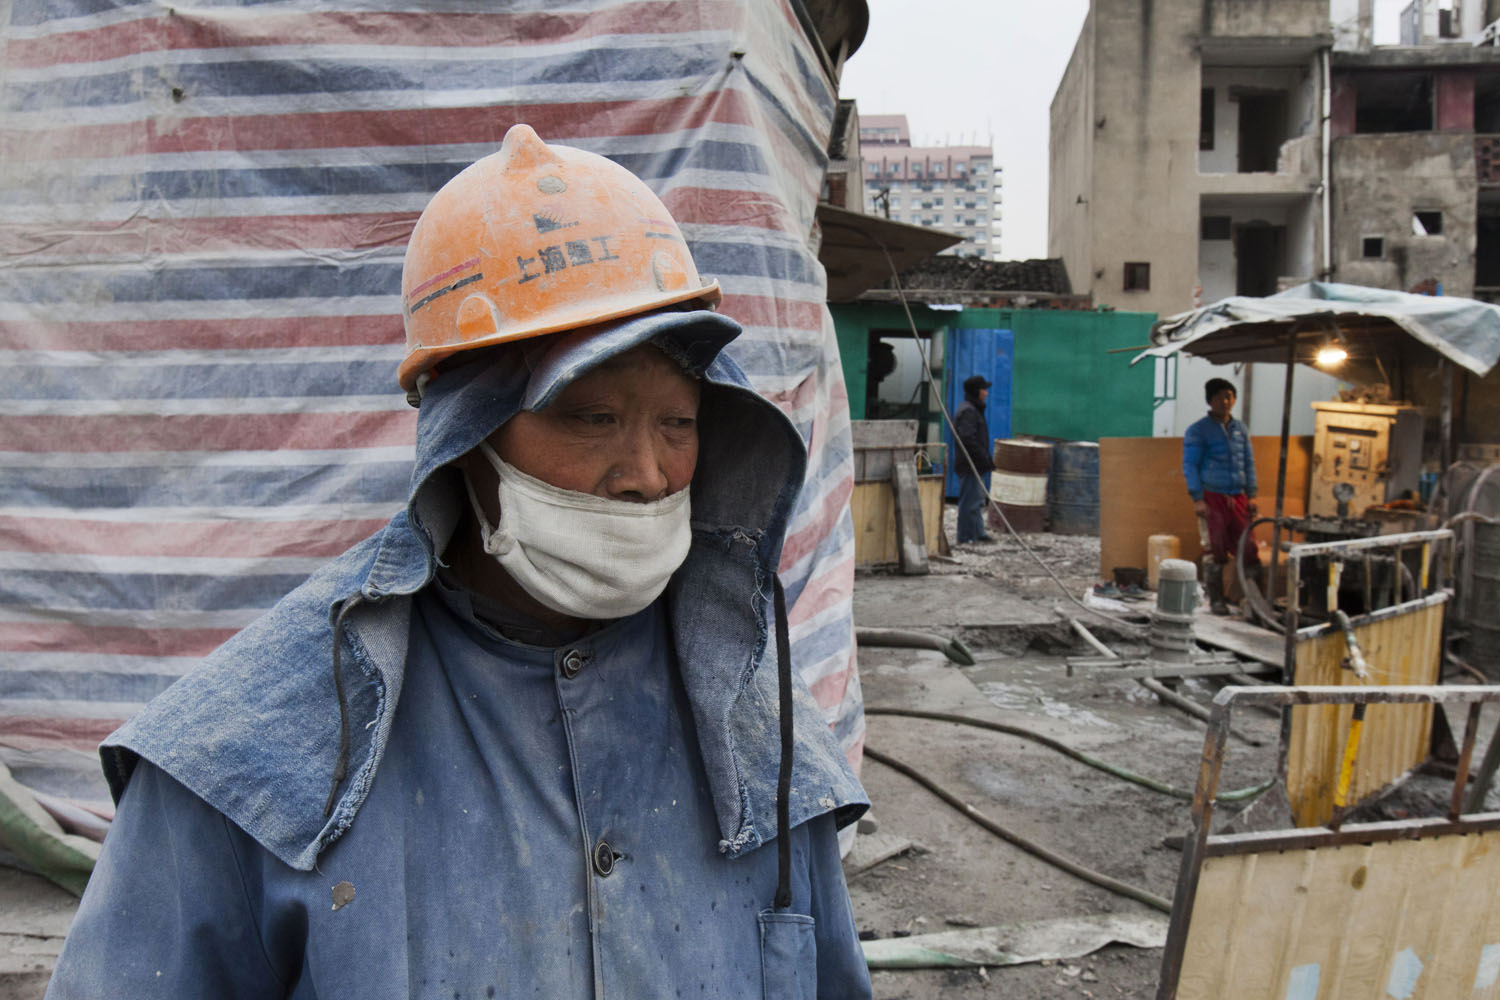 Migrant laborer watches cement being poured. Guangfu Road. Shanghai, China. 2015.